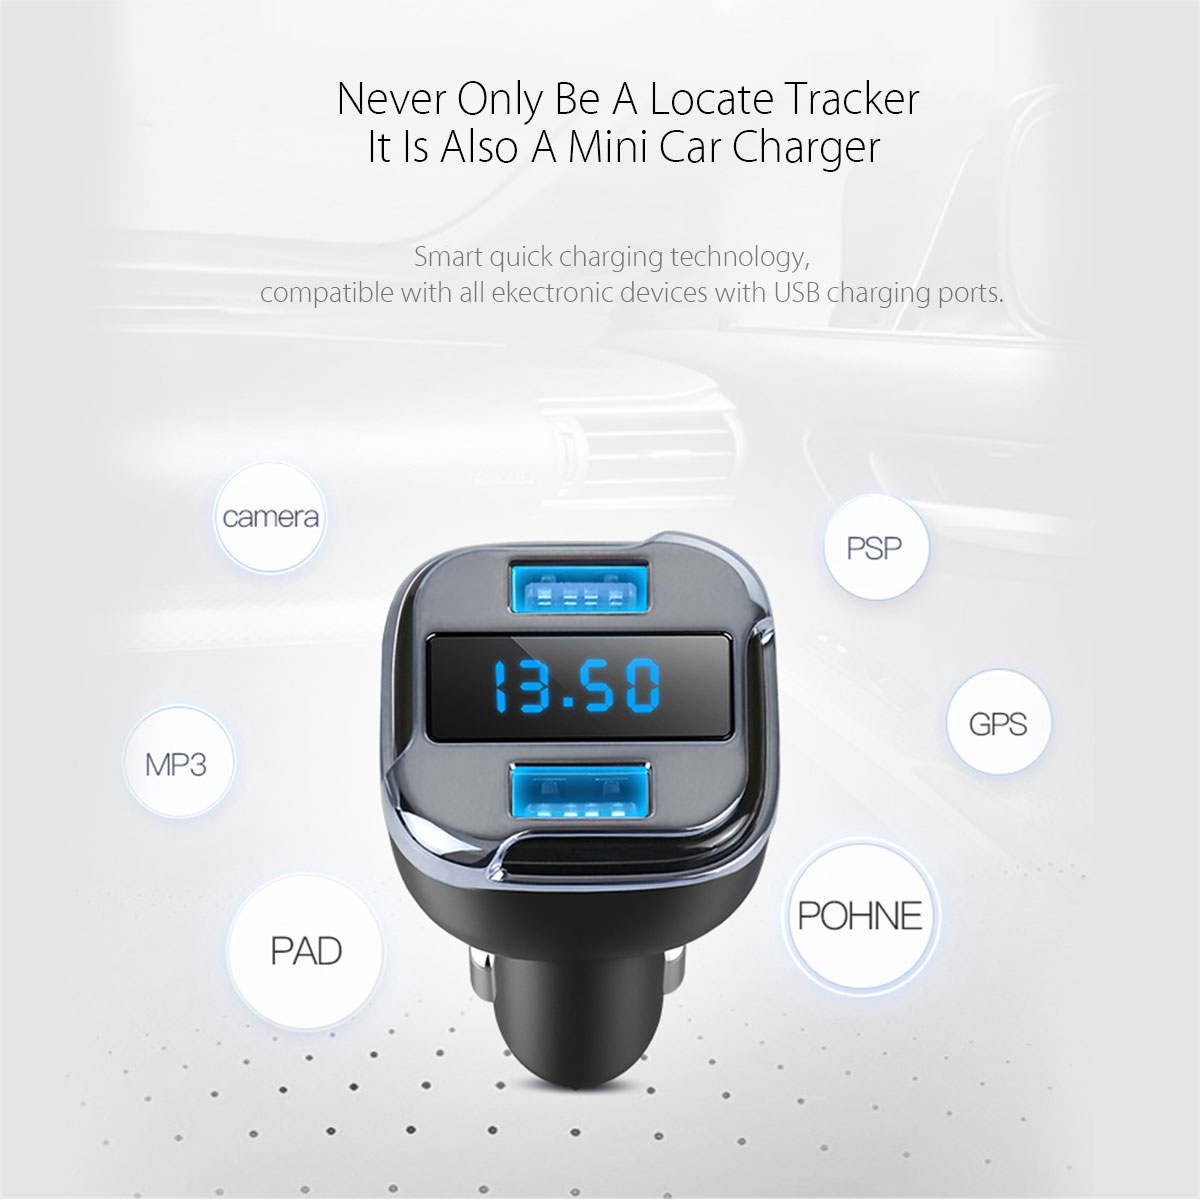 Car-Locator-Tracker-Finder-APP-GPS-USB-Charger-Real-Time-Tracking-Adapter-Mini-1204397